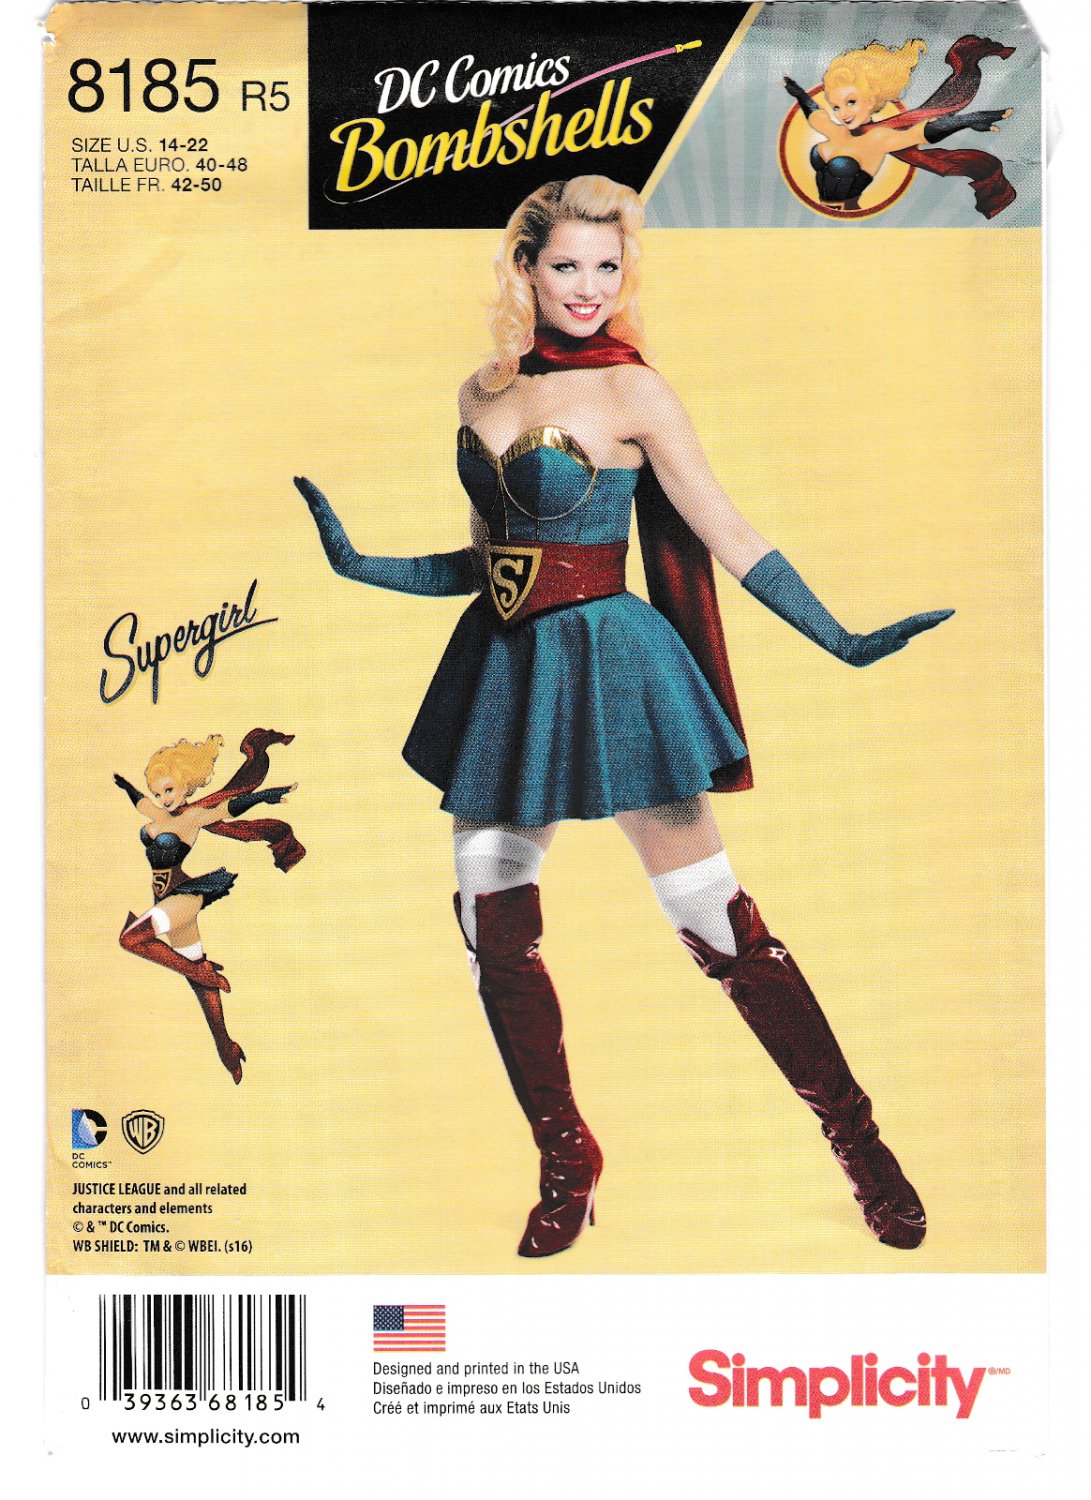 Simplicity 8185 Misses Sewing Pattern DC Comics Supergirl Bombshells Costume Sizes 14-16-18-20-22